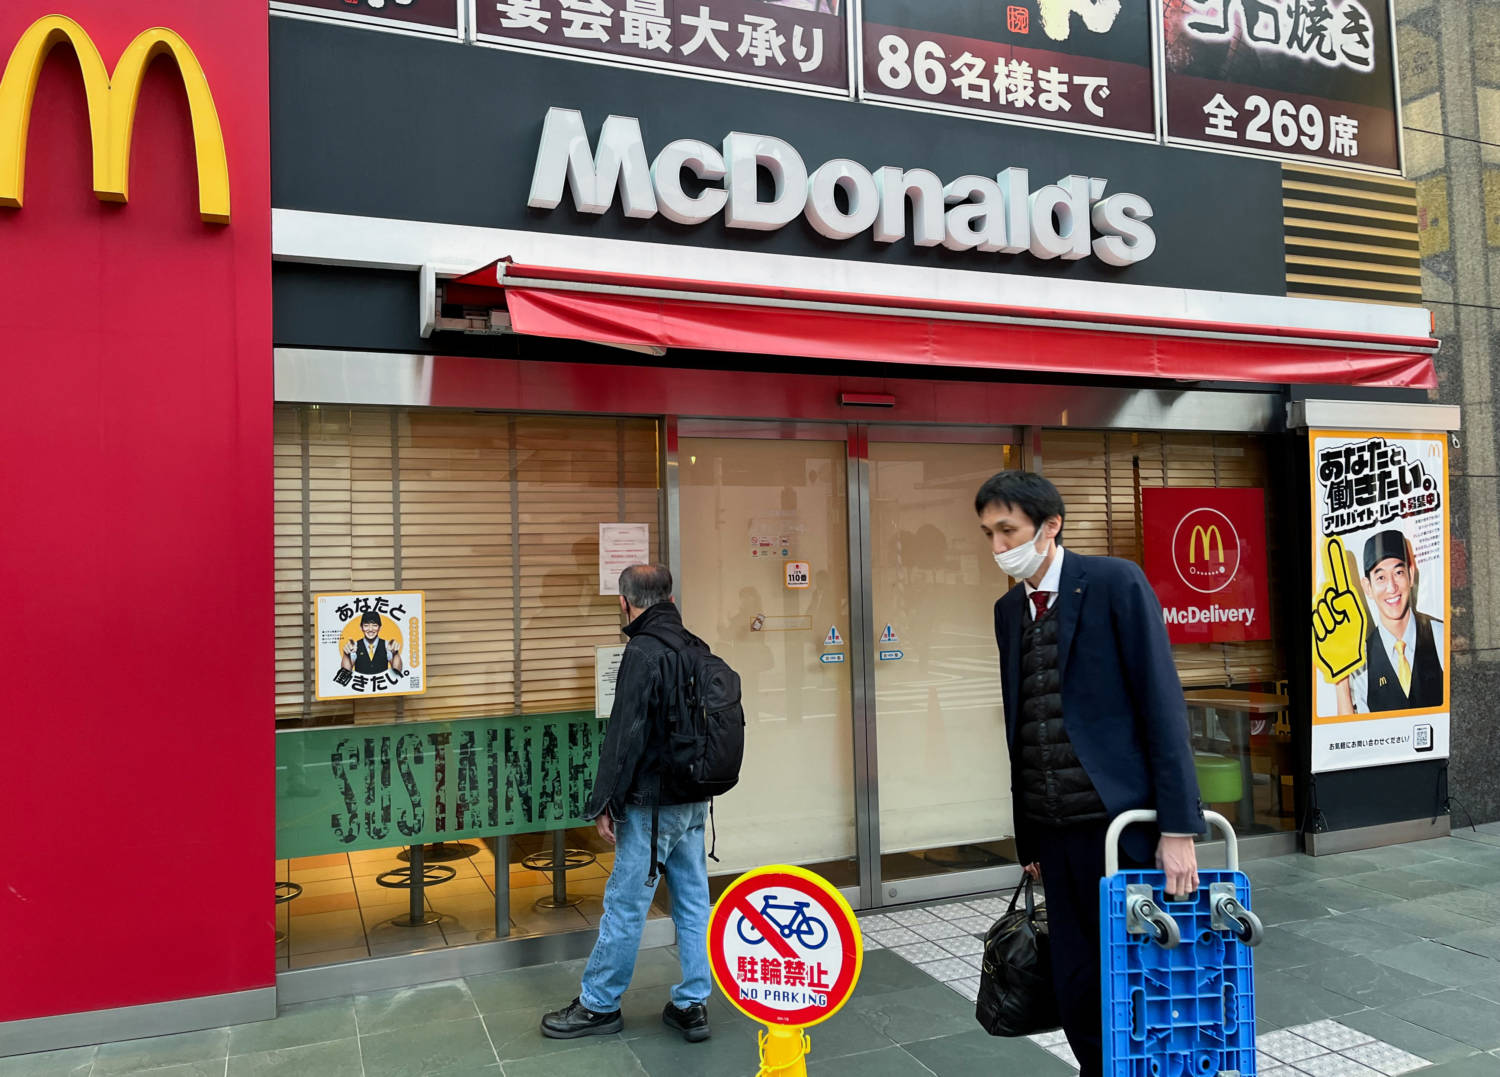 Mcdonald's Halts Operations At Stores In Japan Due To System Disruption